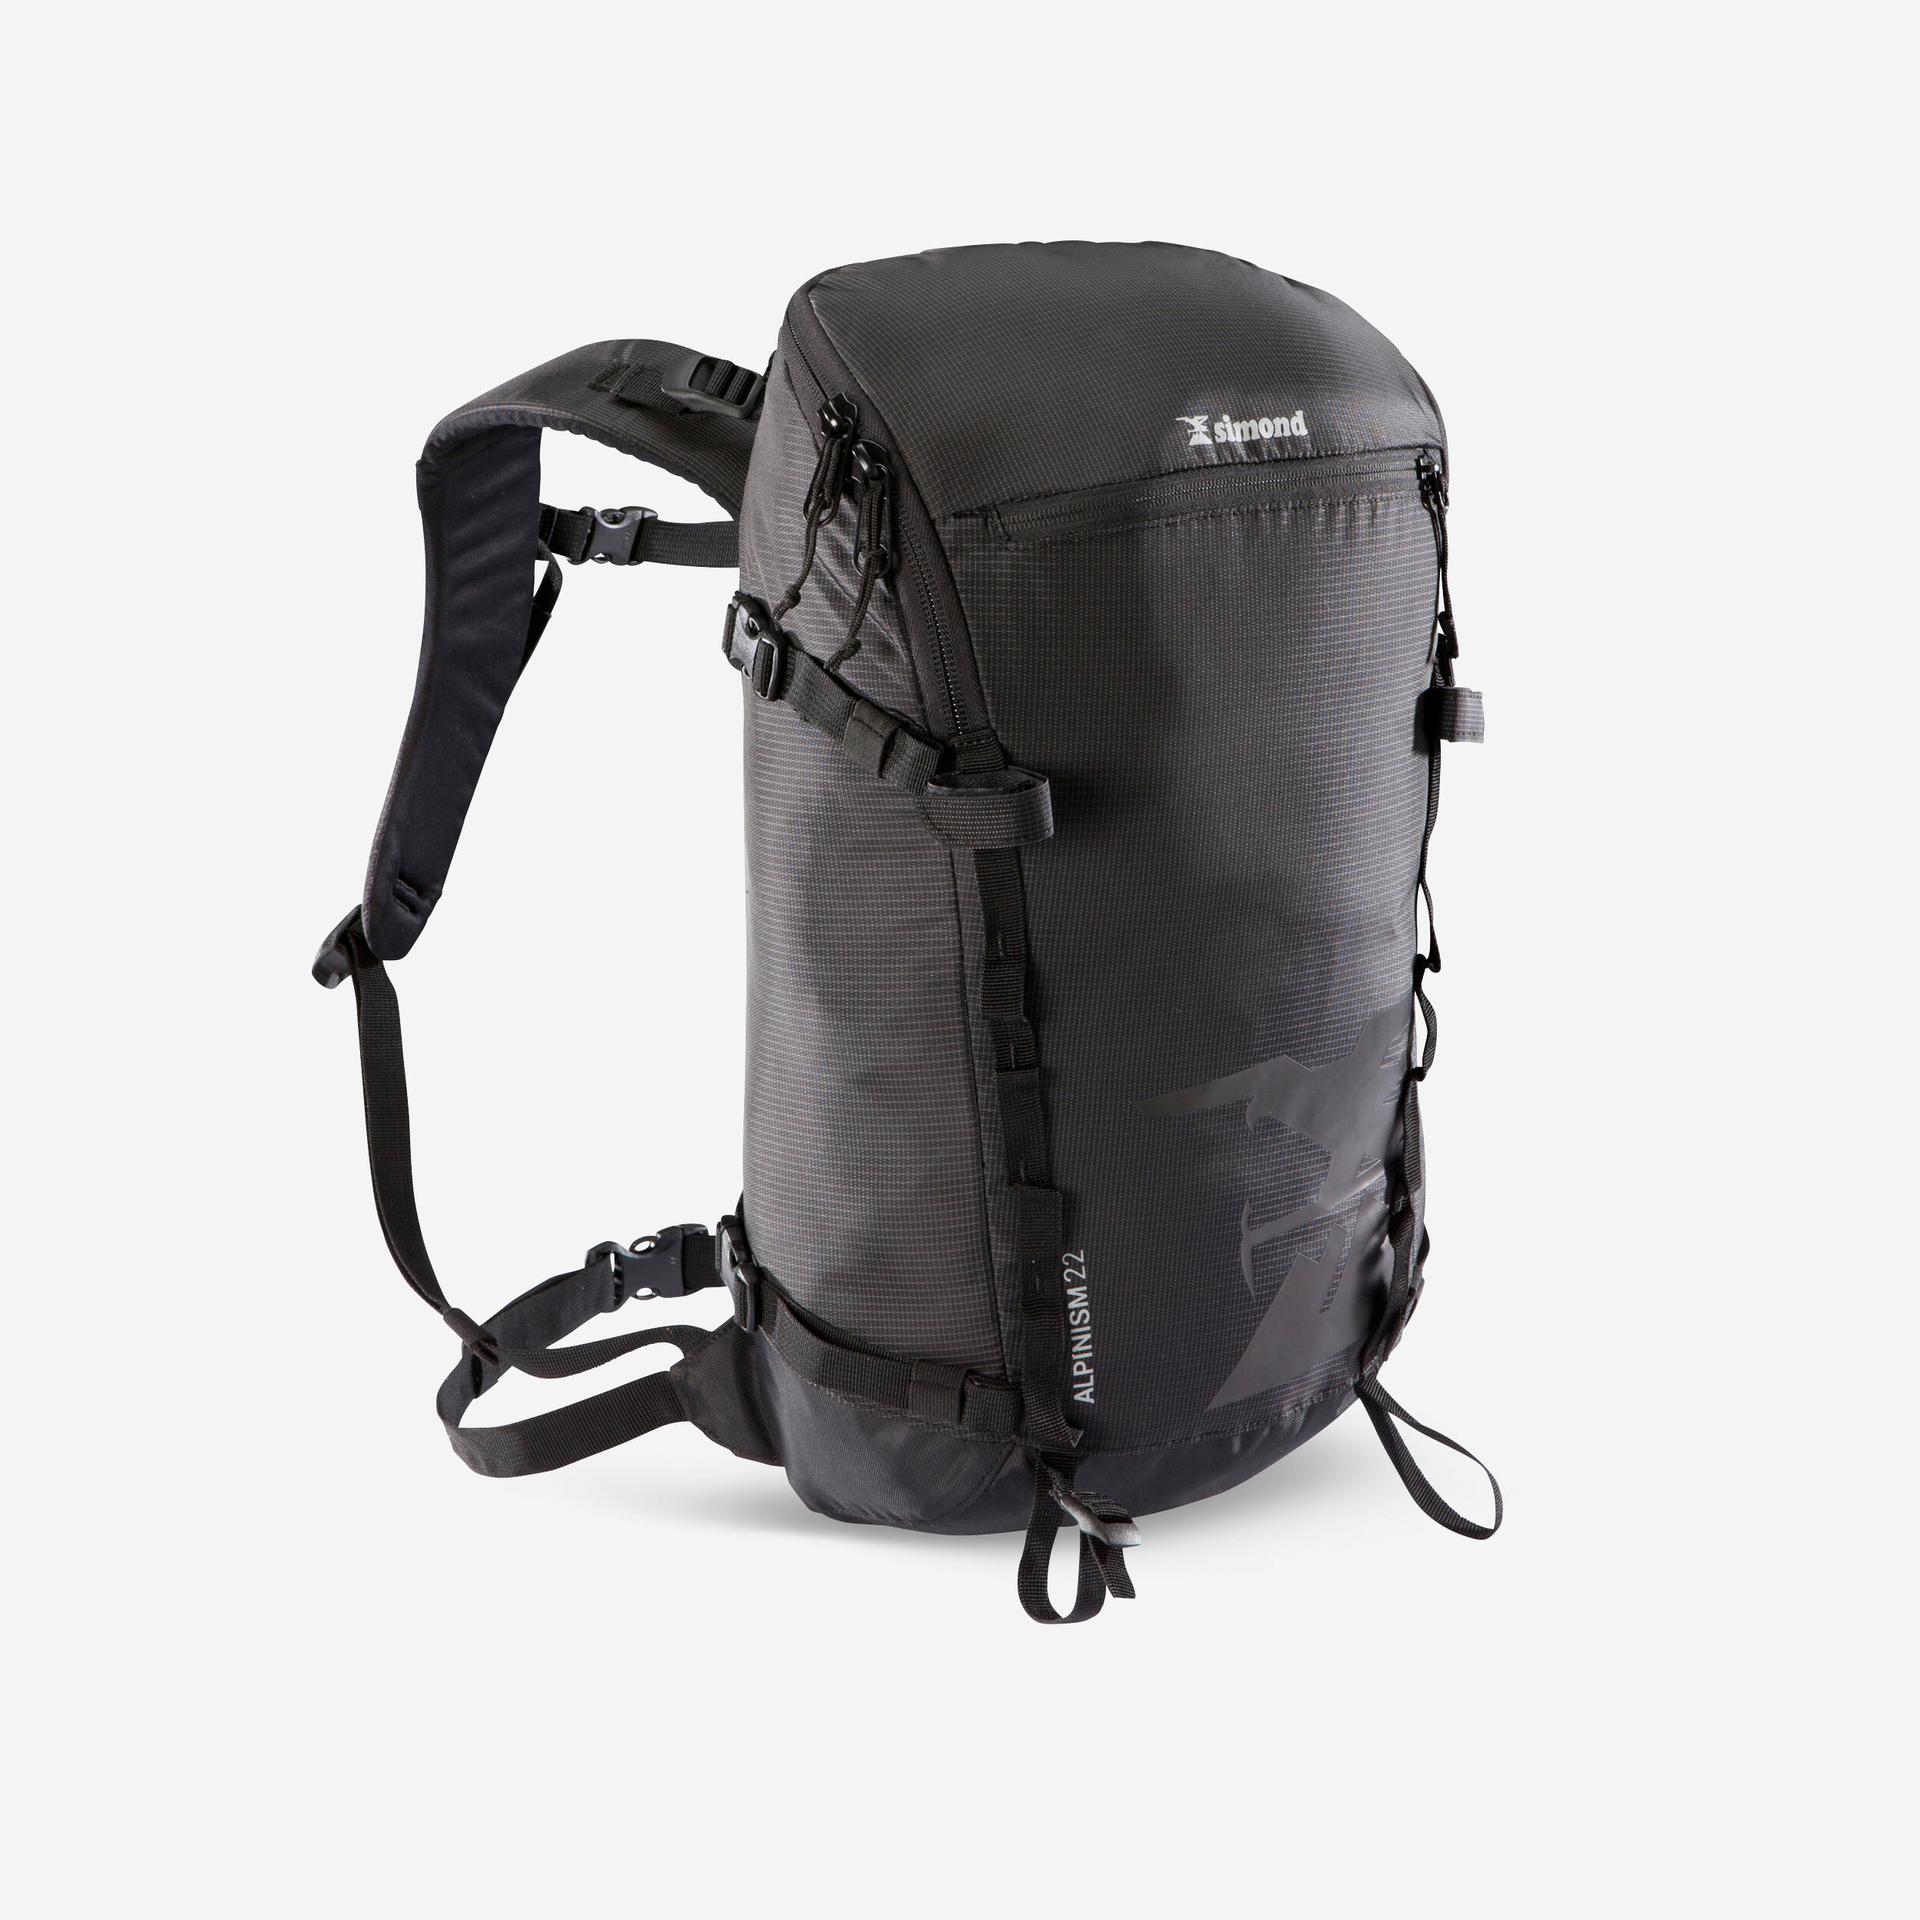 backpack-22l-simond-for-hiking/climbing/mountaineering/skiing/snowboarding